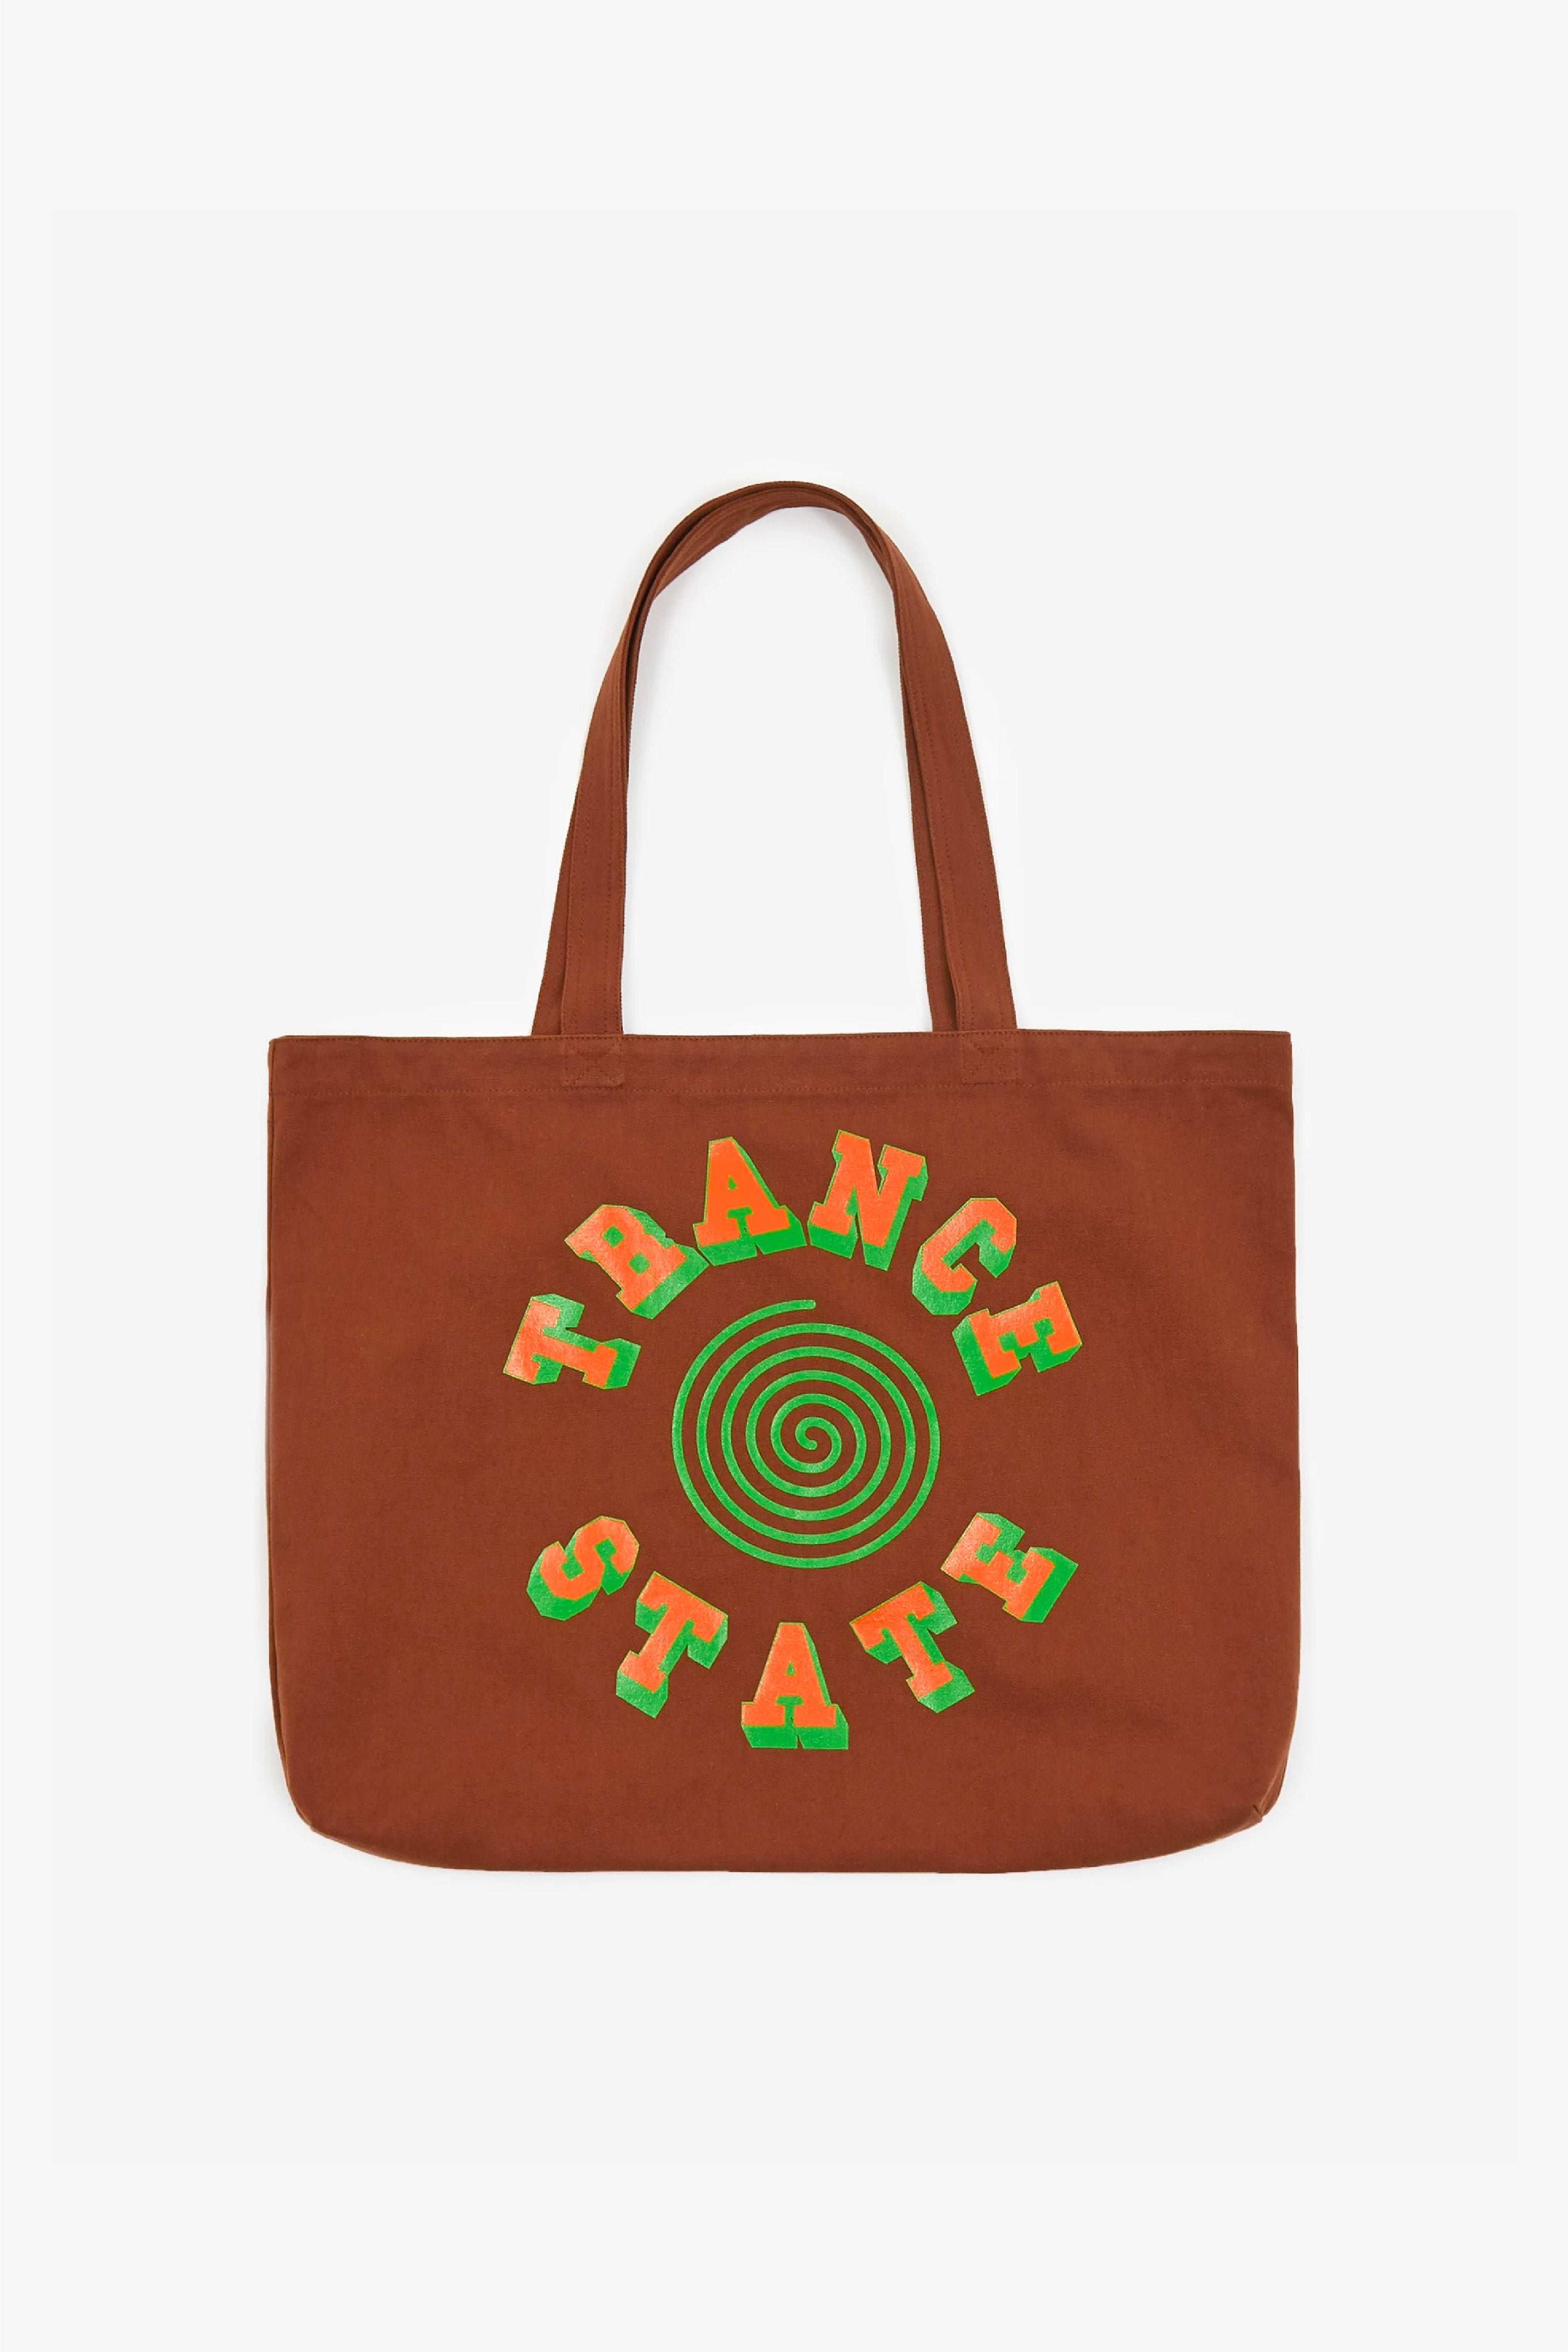 Selectshop FRAME - P.A.M. Is A State Of Mind Tote All-accessories Dubai